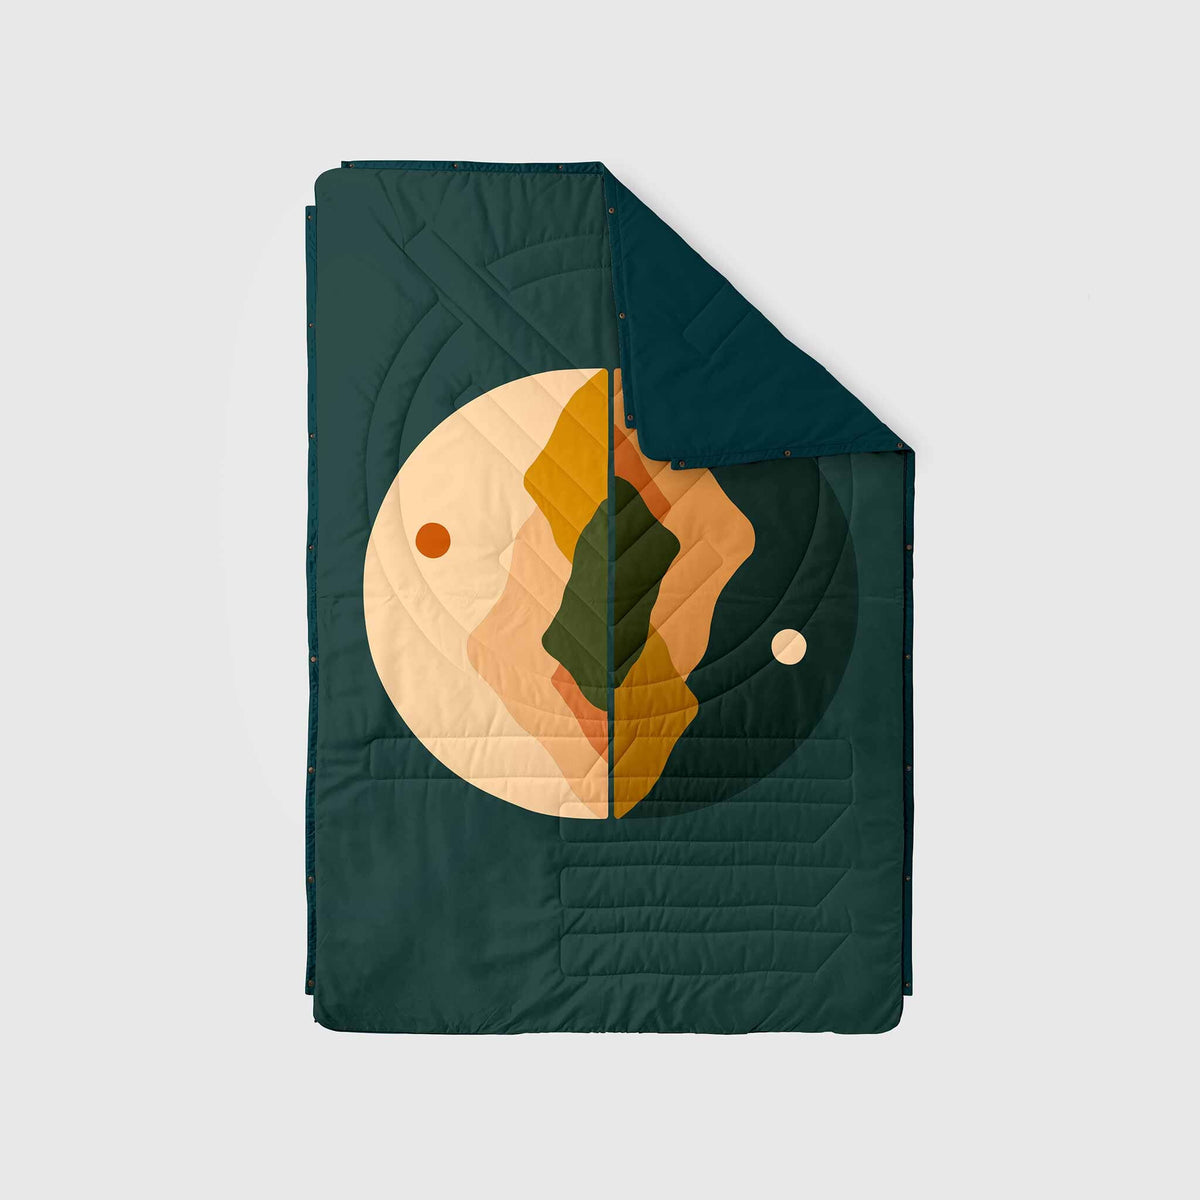 VOITED Recycled Ripstop Outdoor Camping Blanket - Day & Night